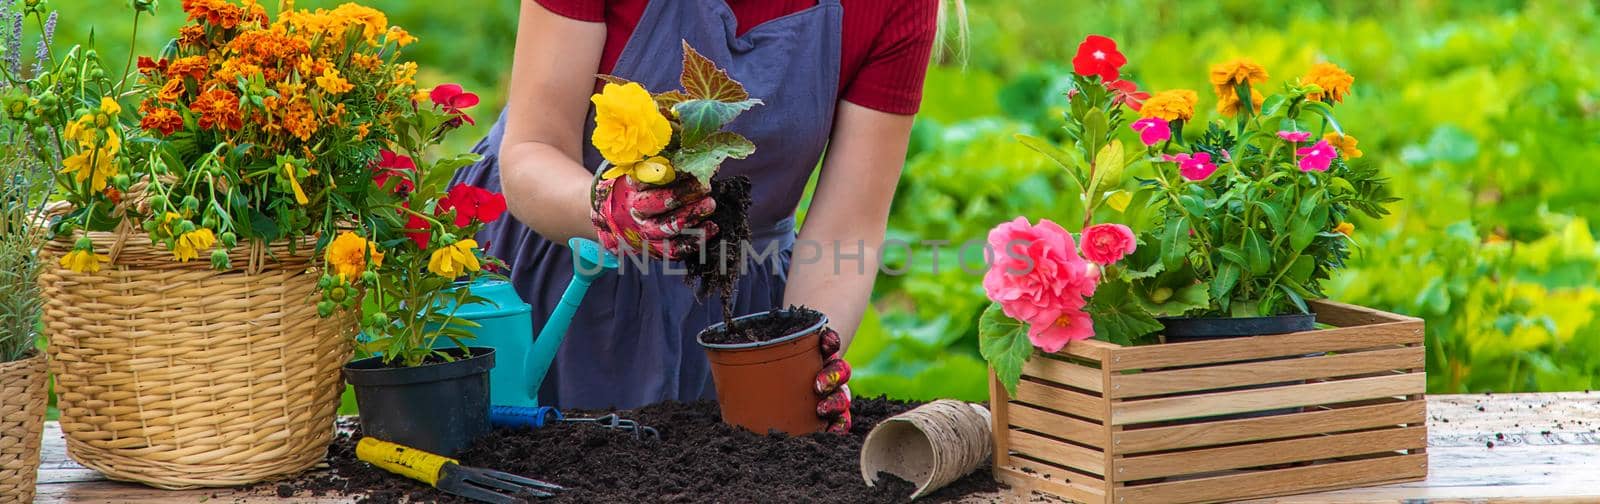 A woman is planting flowers in the garden. Selective focus. People.